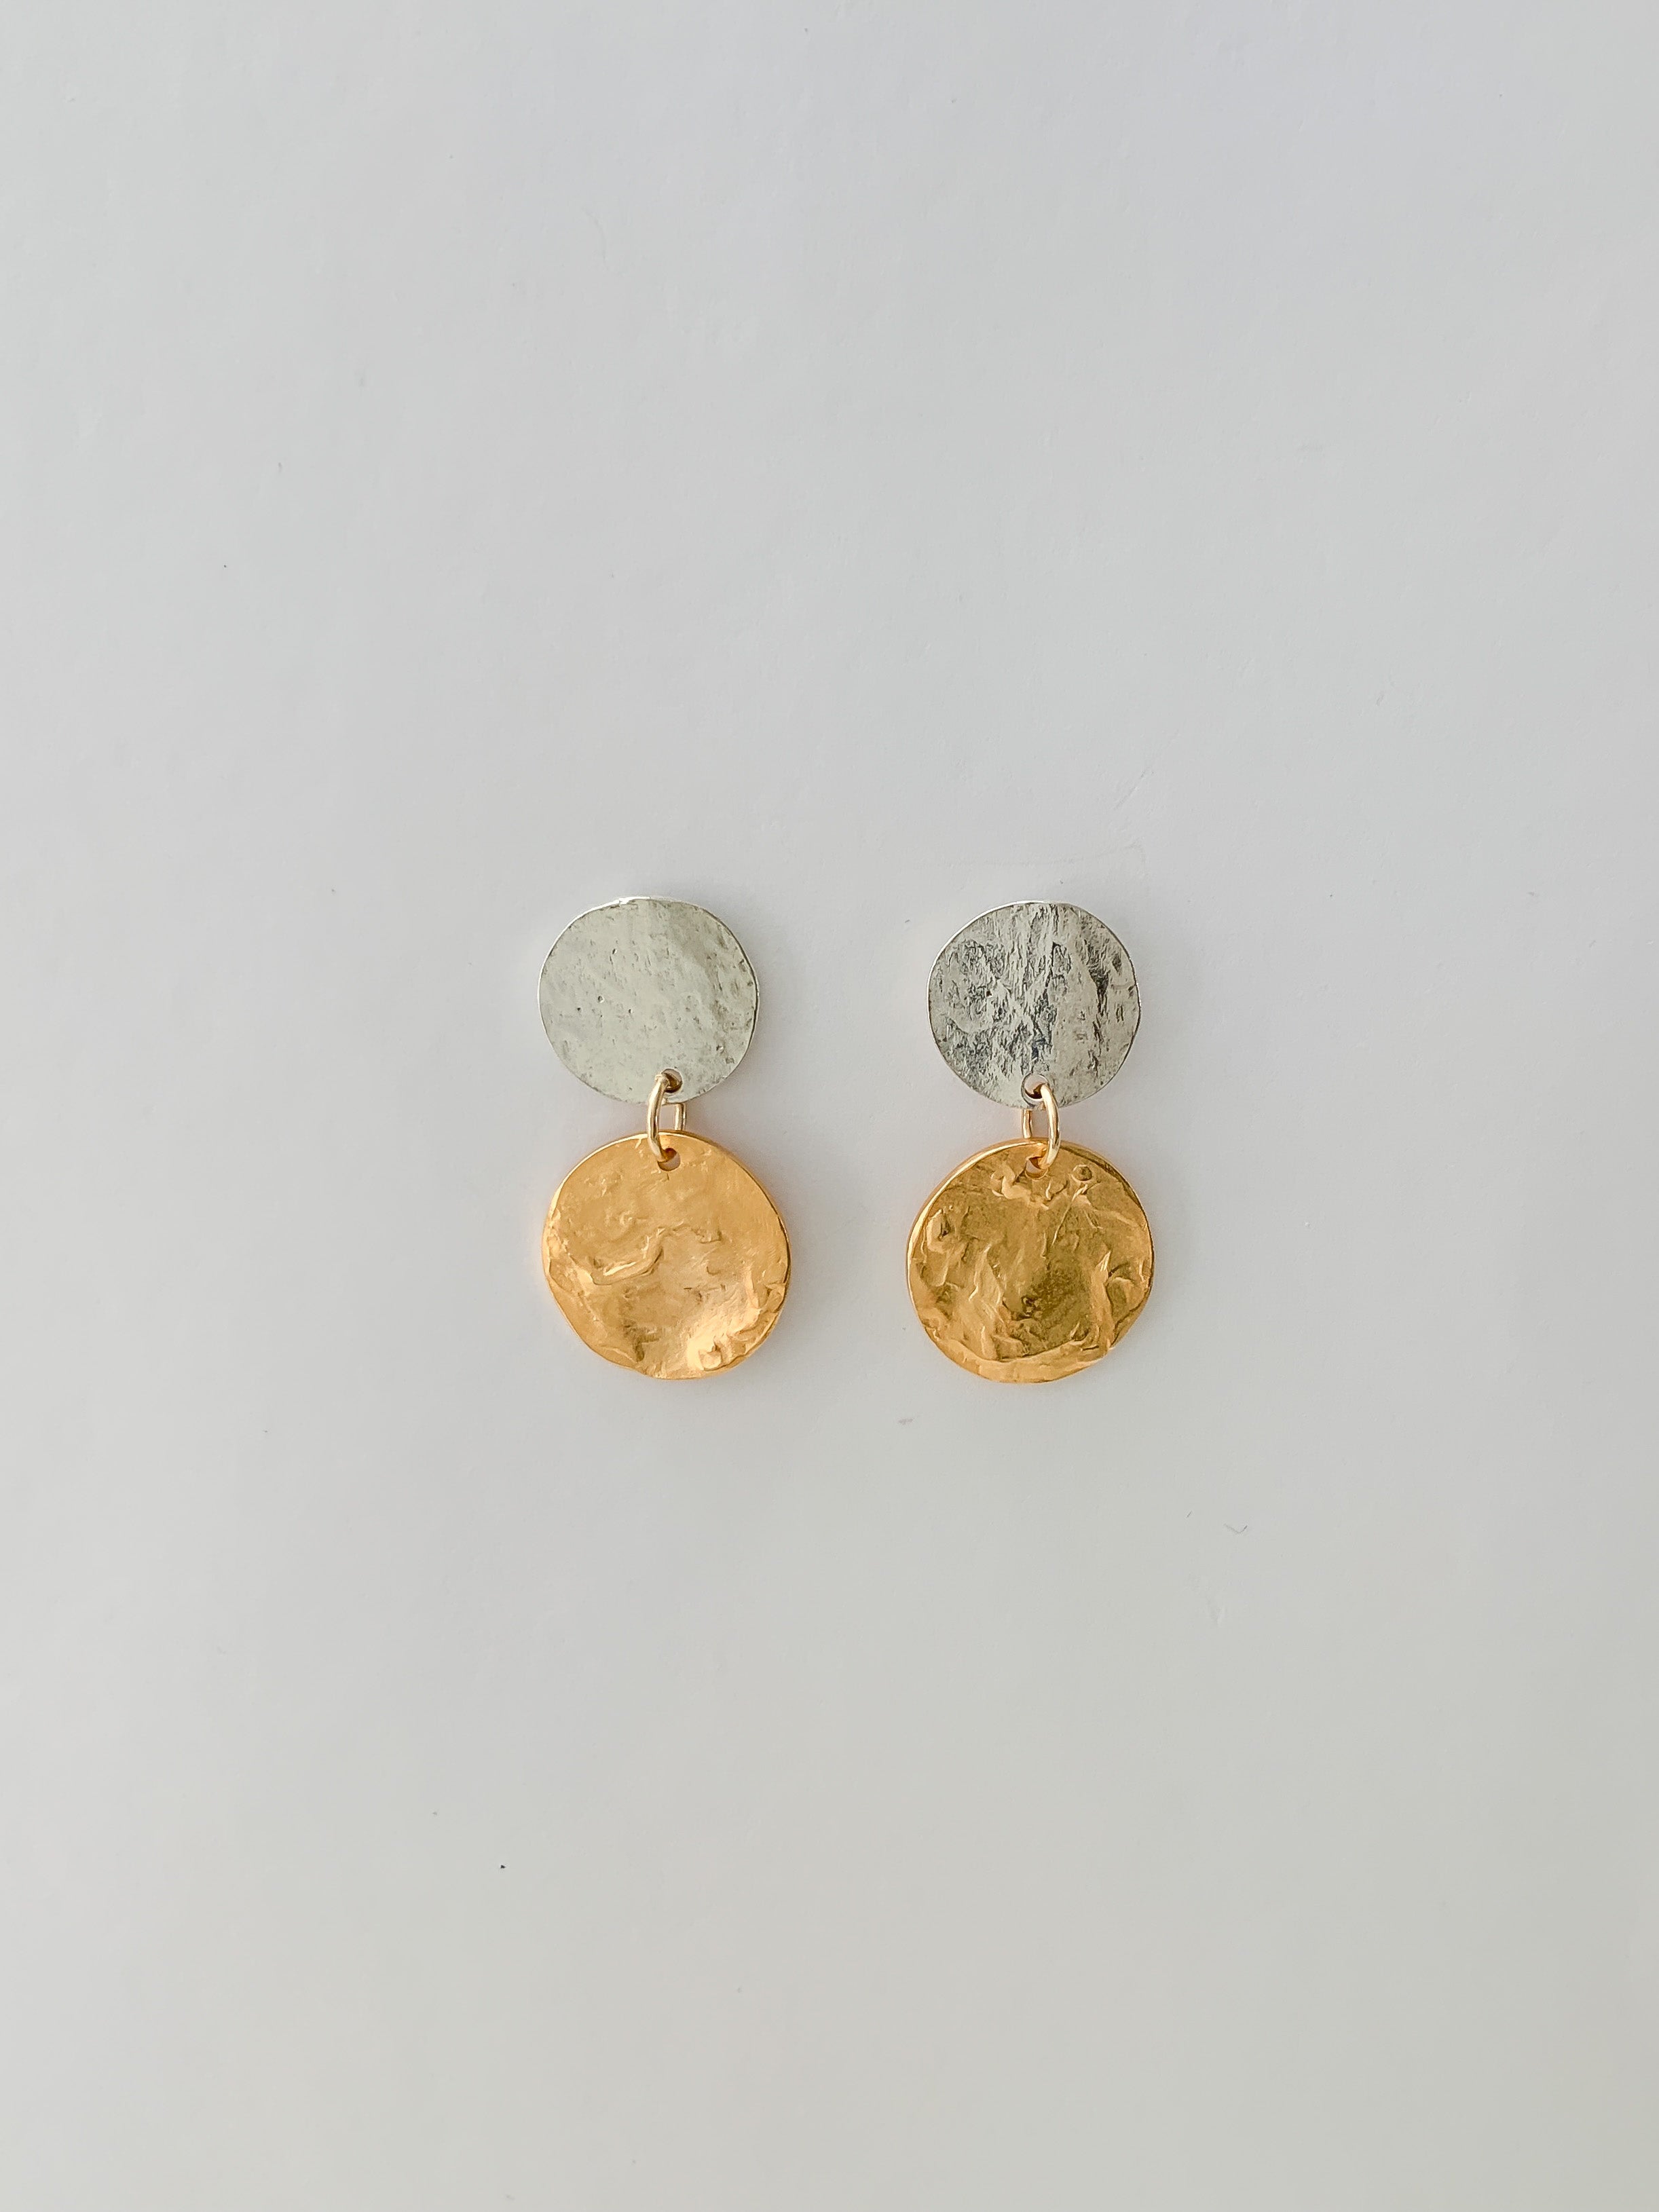 Companion Earrings Silver and Gold disks